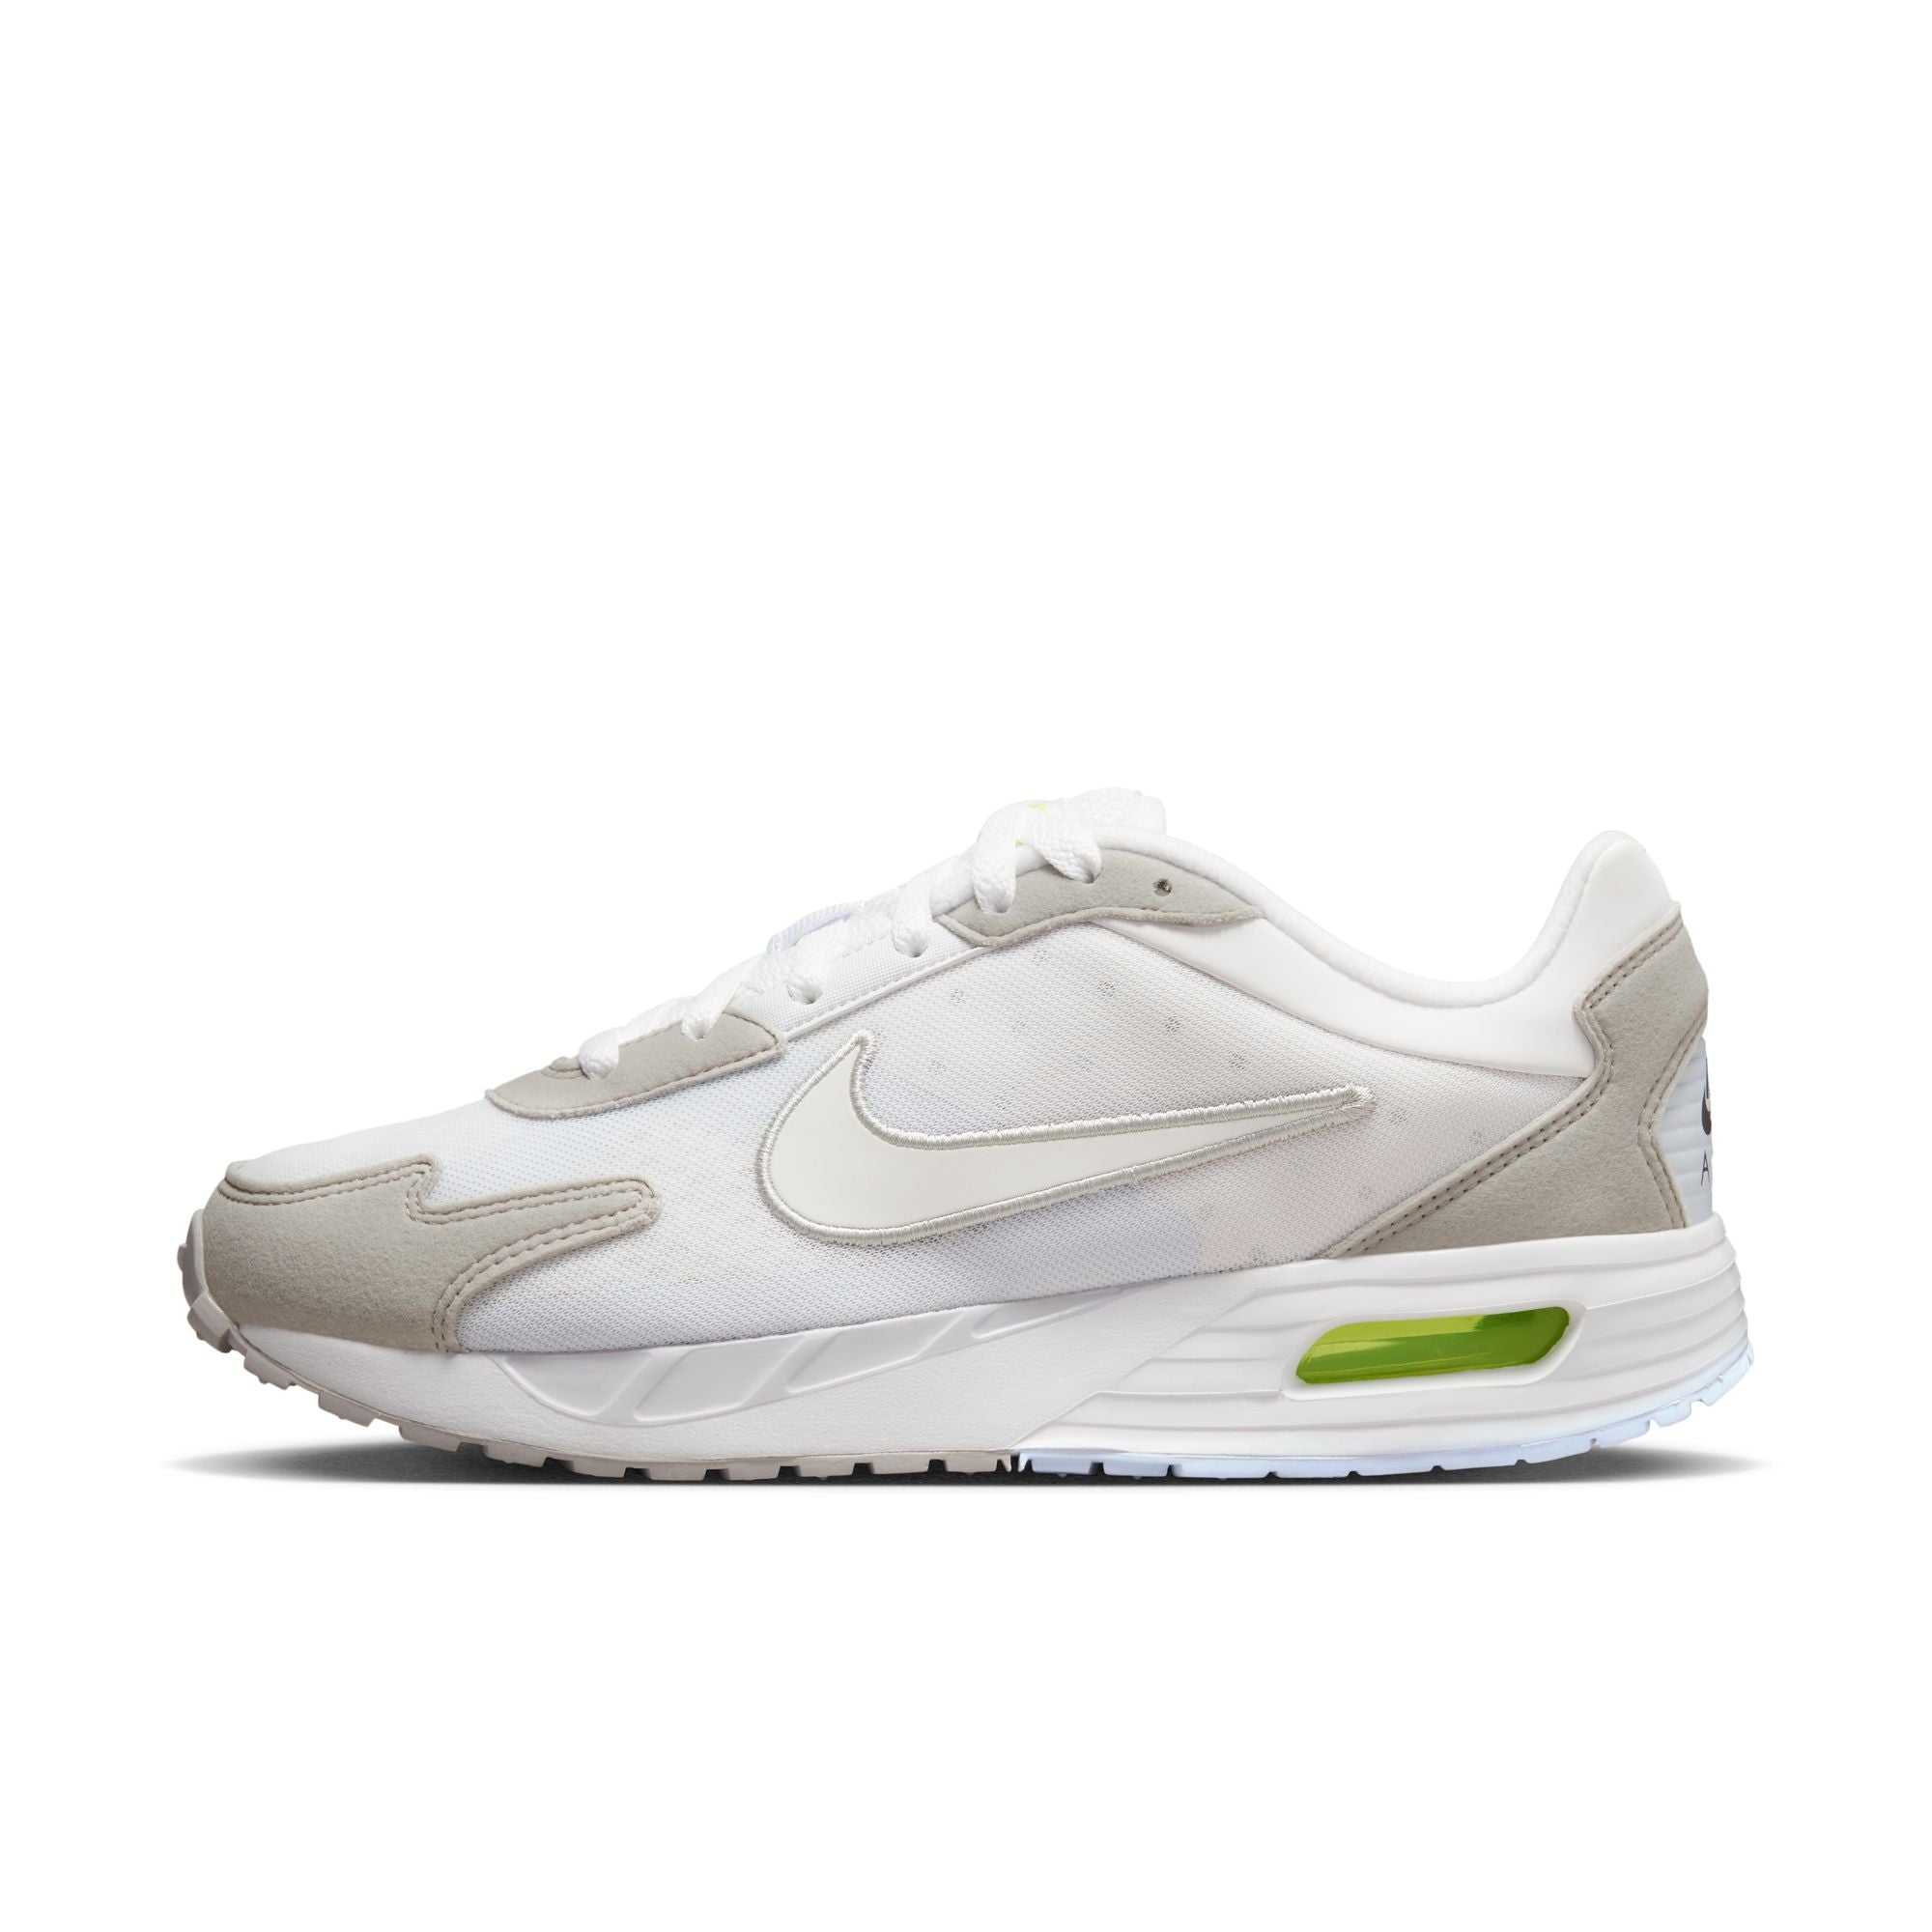 NIKE AIR MAX SOLO WOMEN'S SHOES